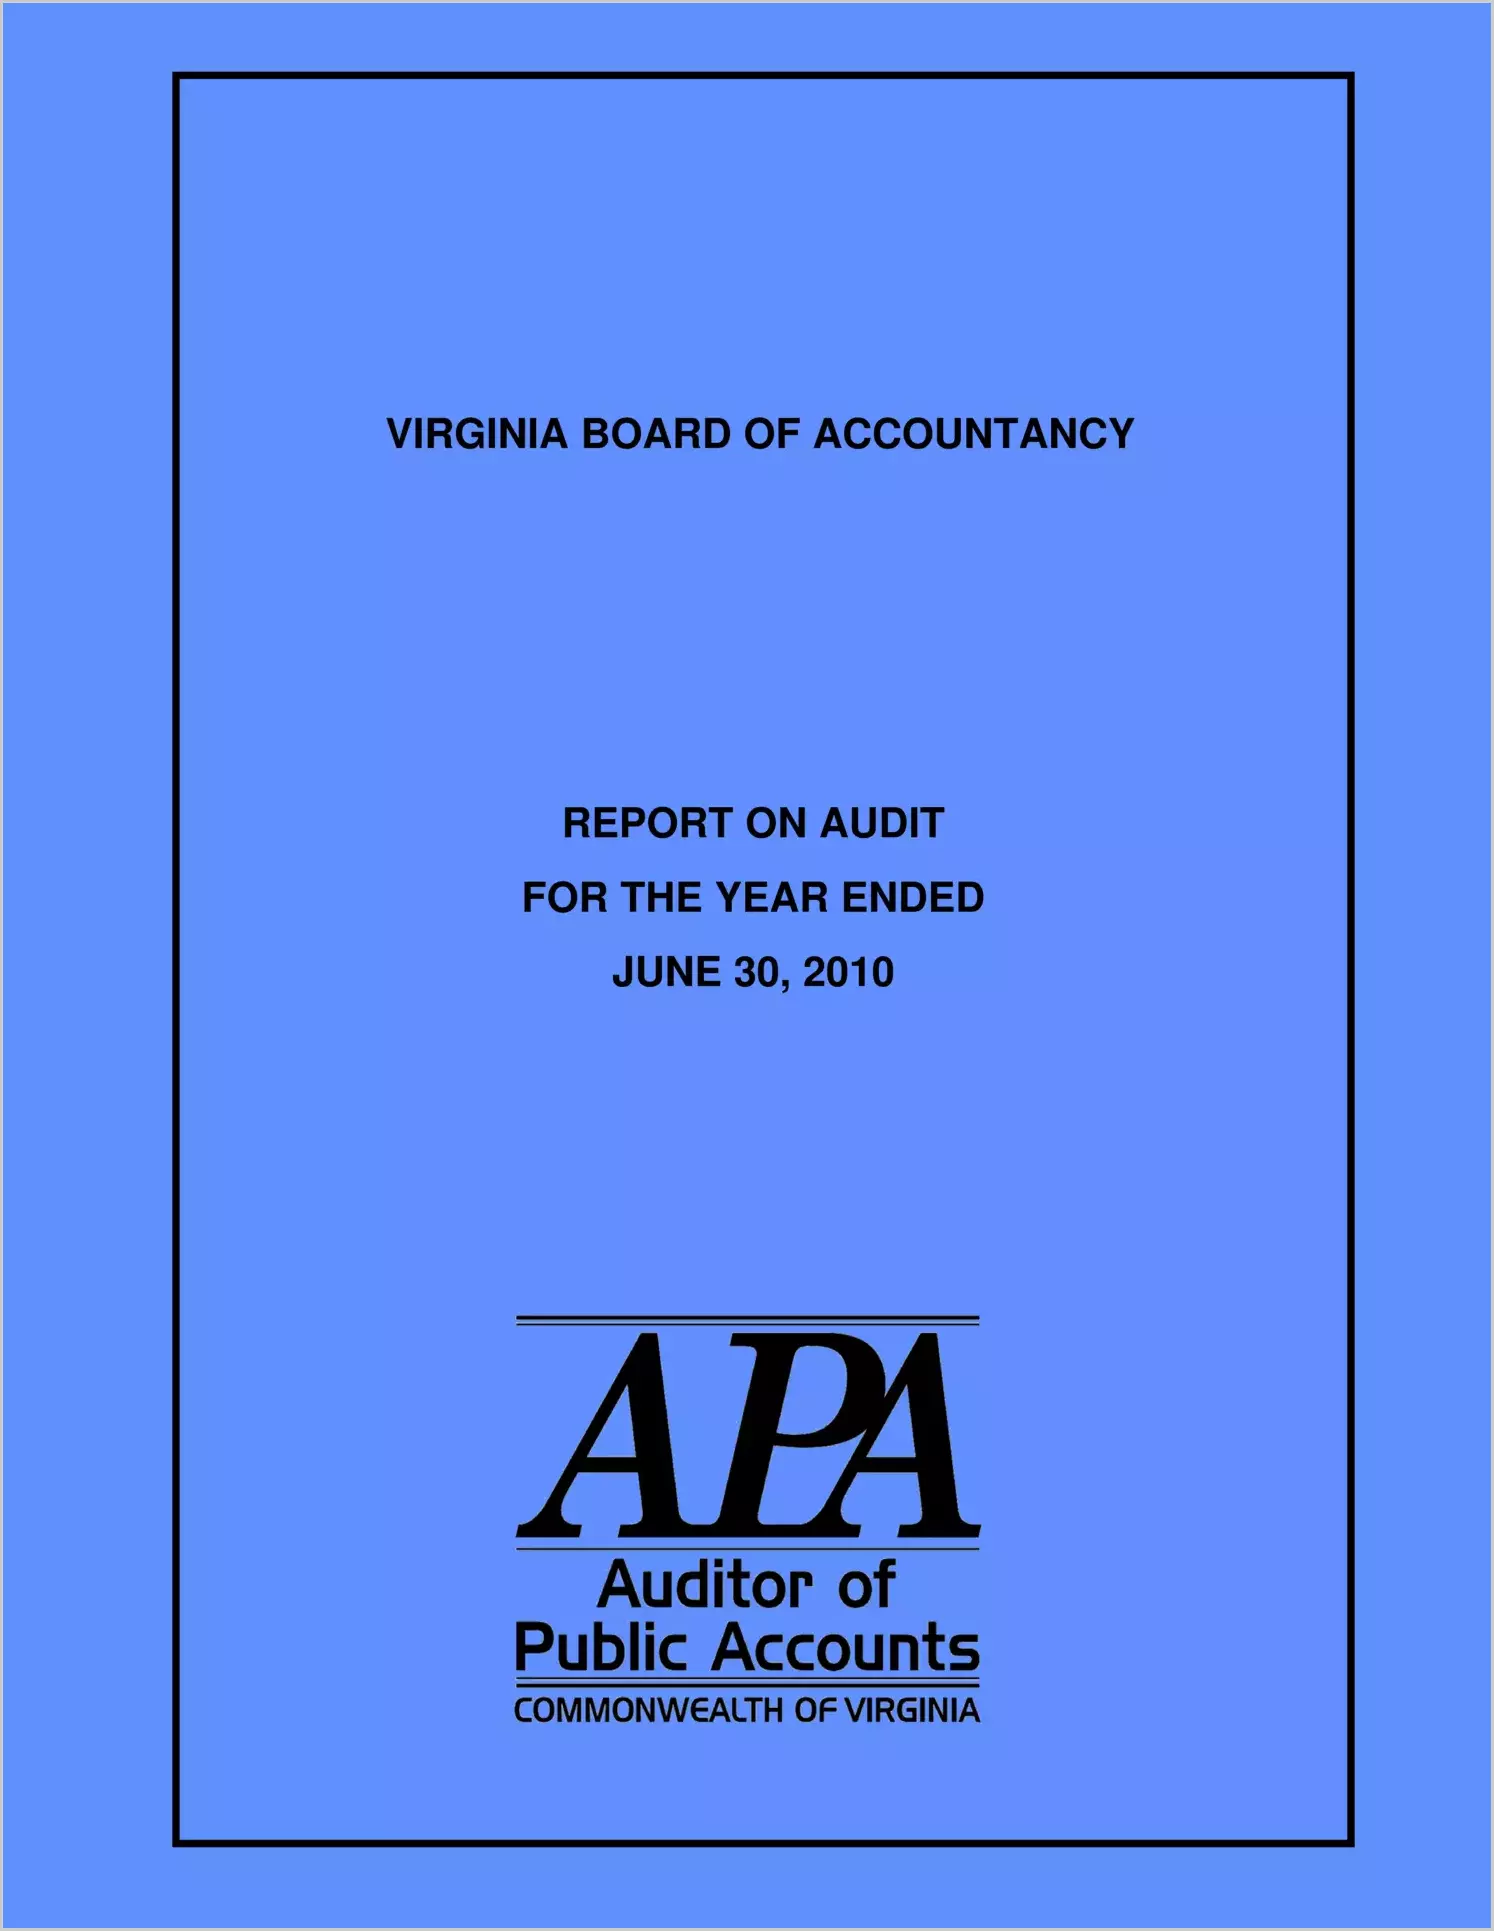 Virginia Board of Accountancy for the year ended June 30, 2010